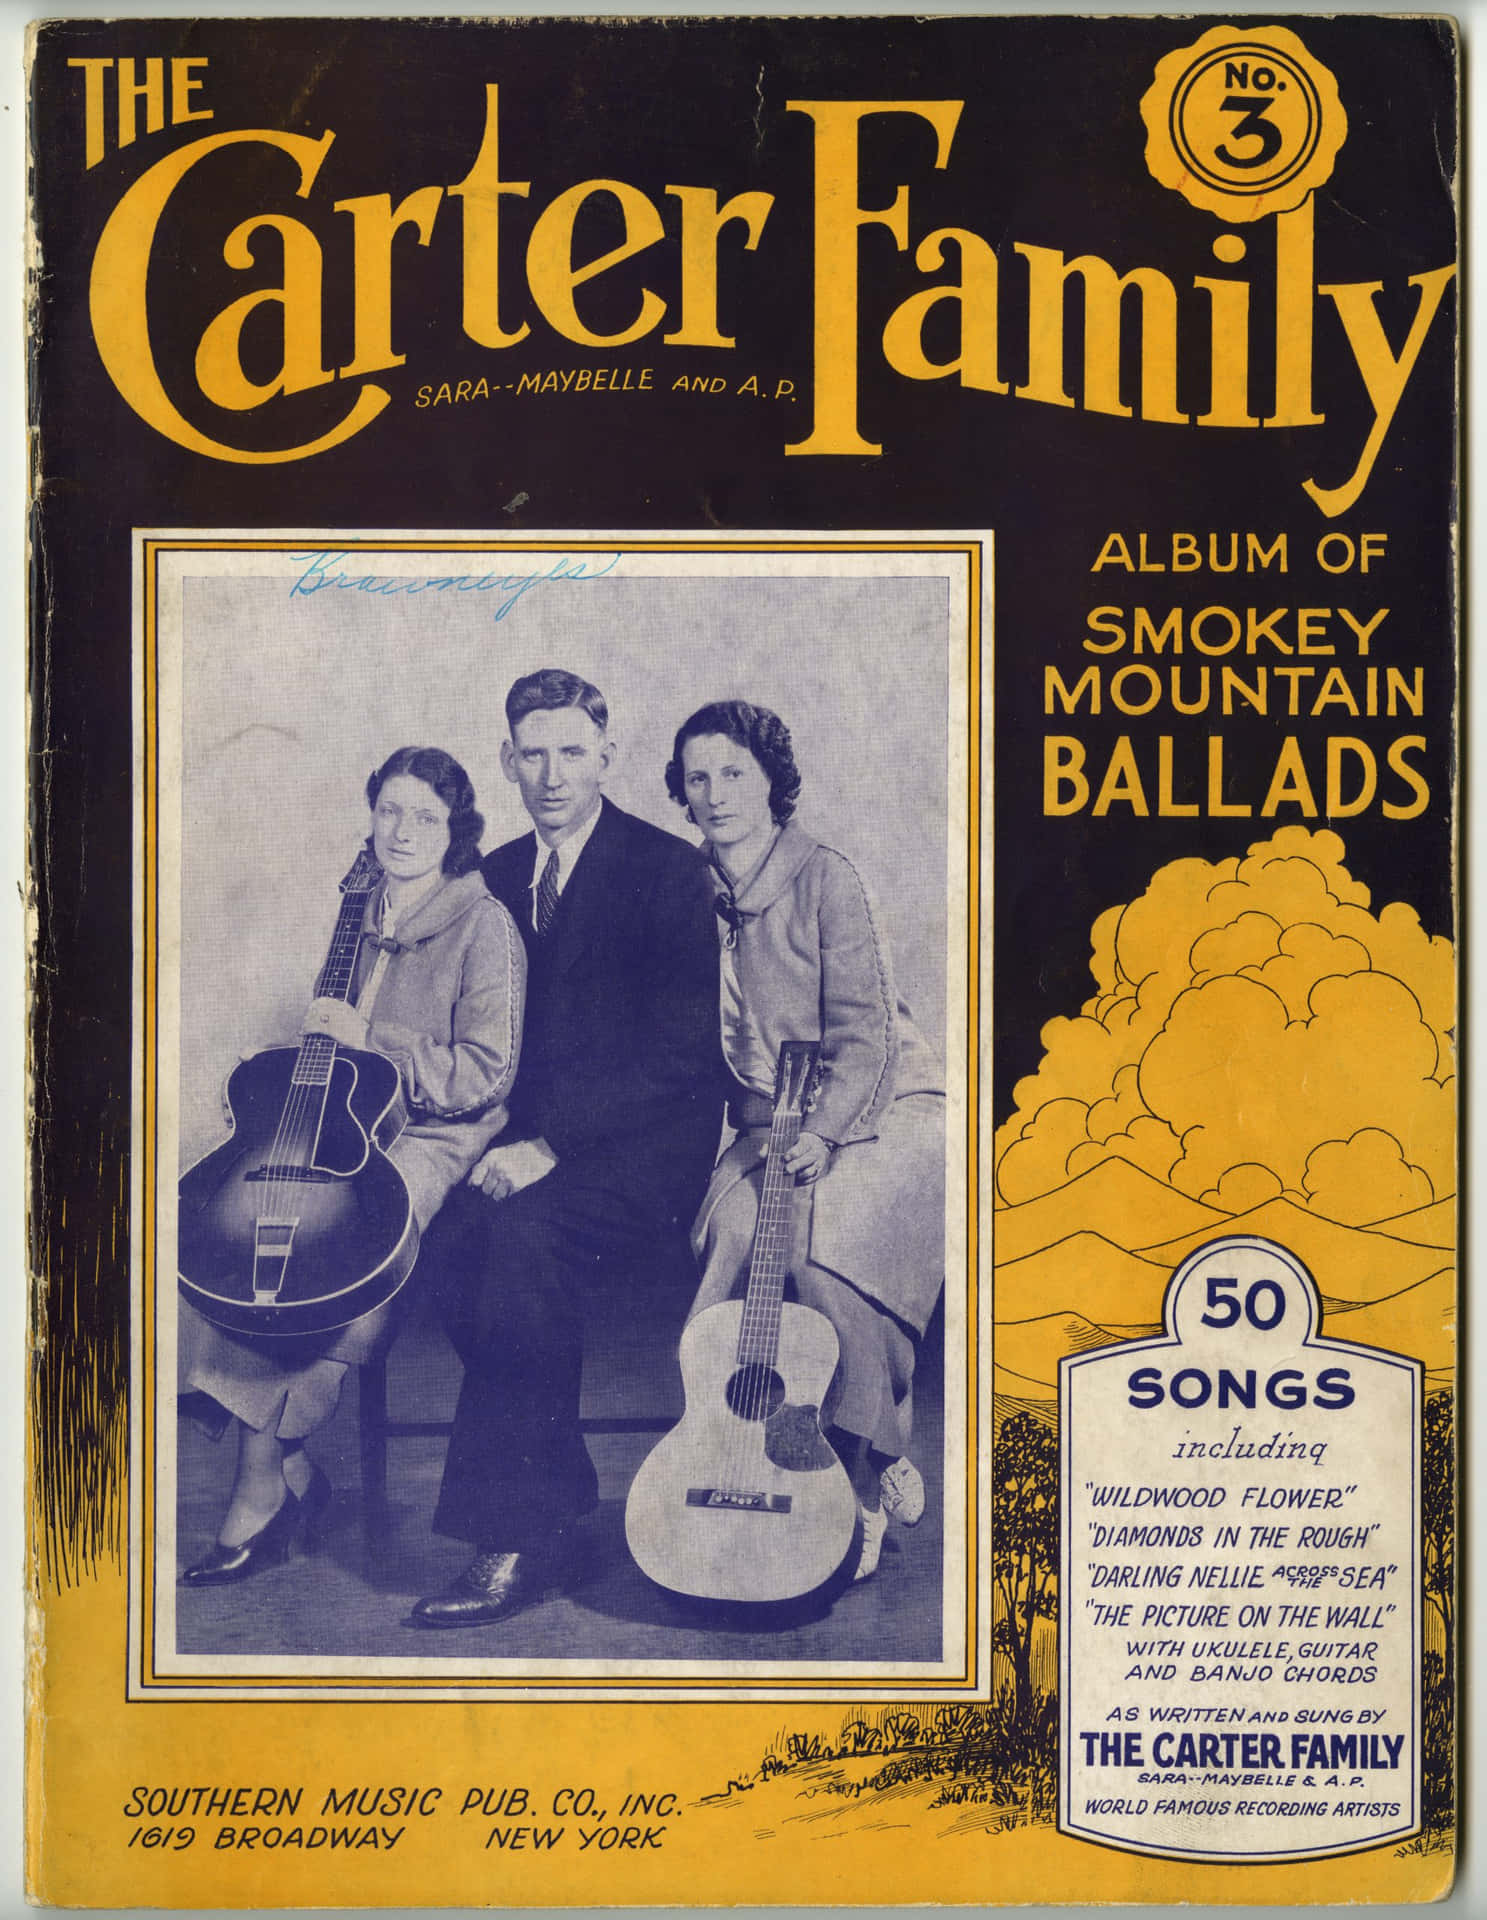 "Vintage Album Poster of the Renowned Carter Family" Wallpaper